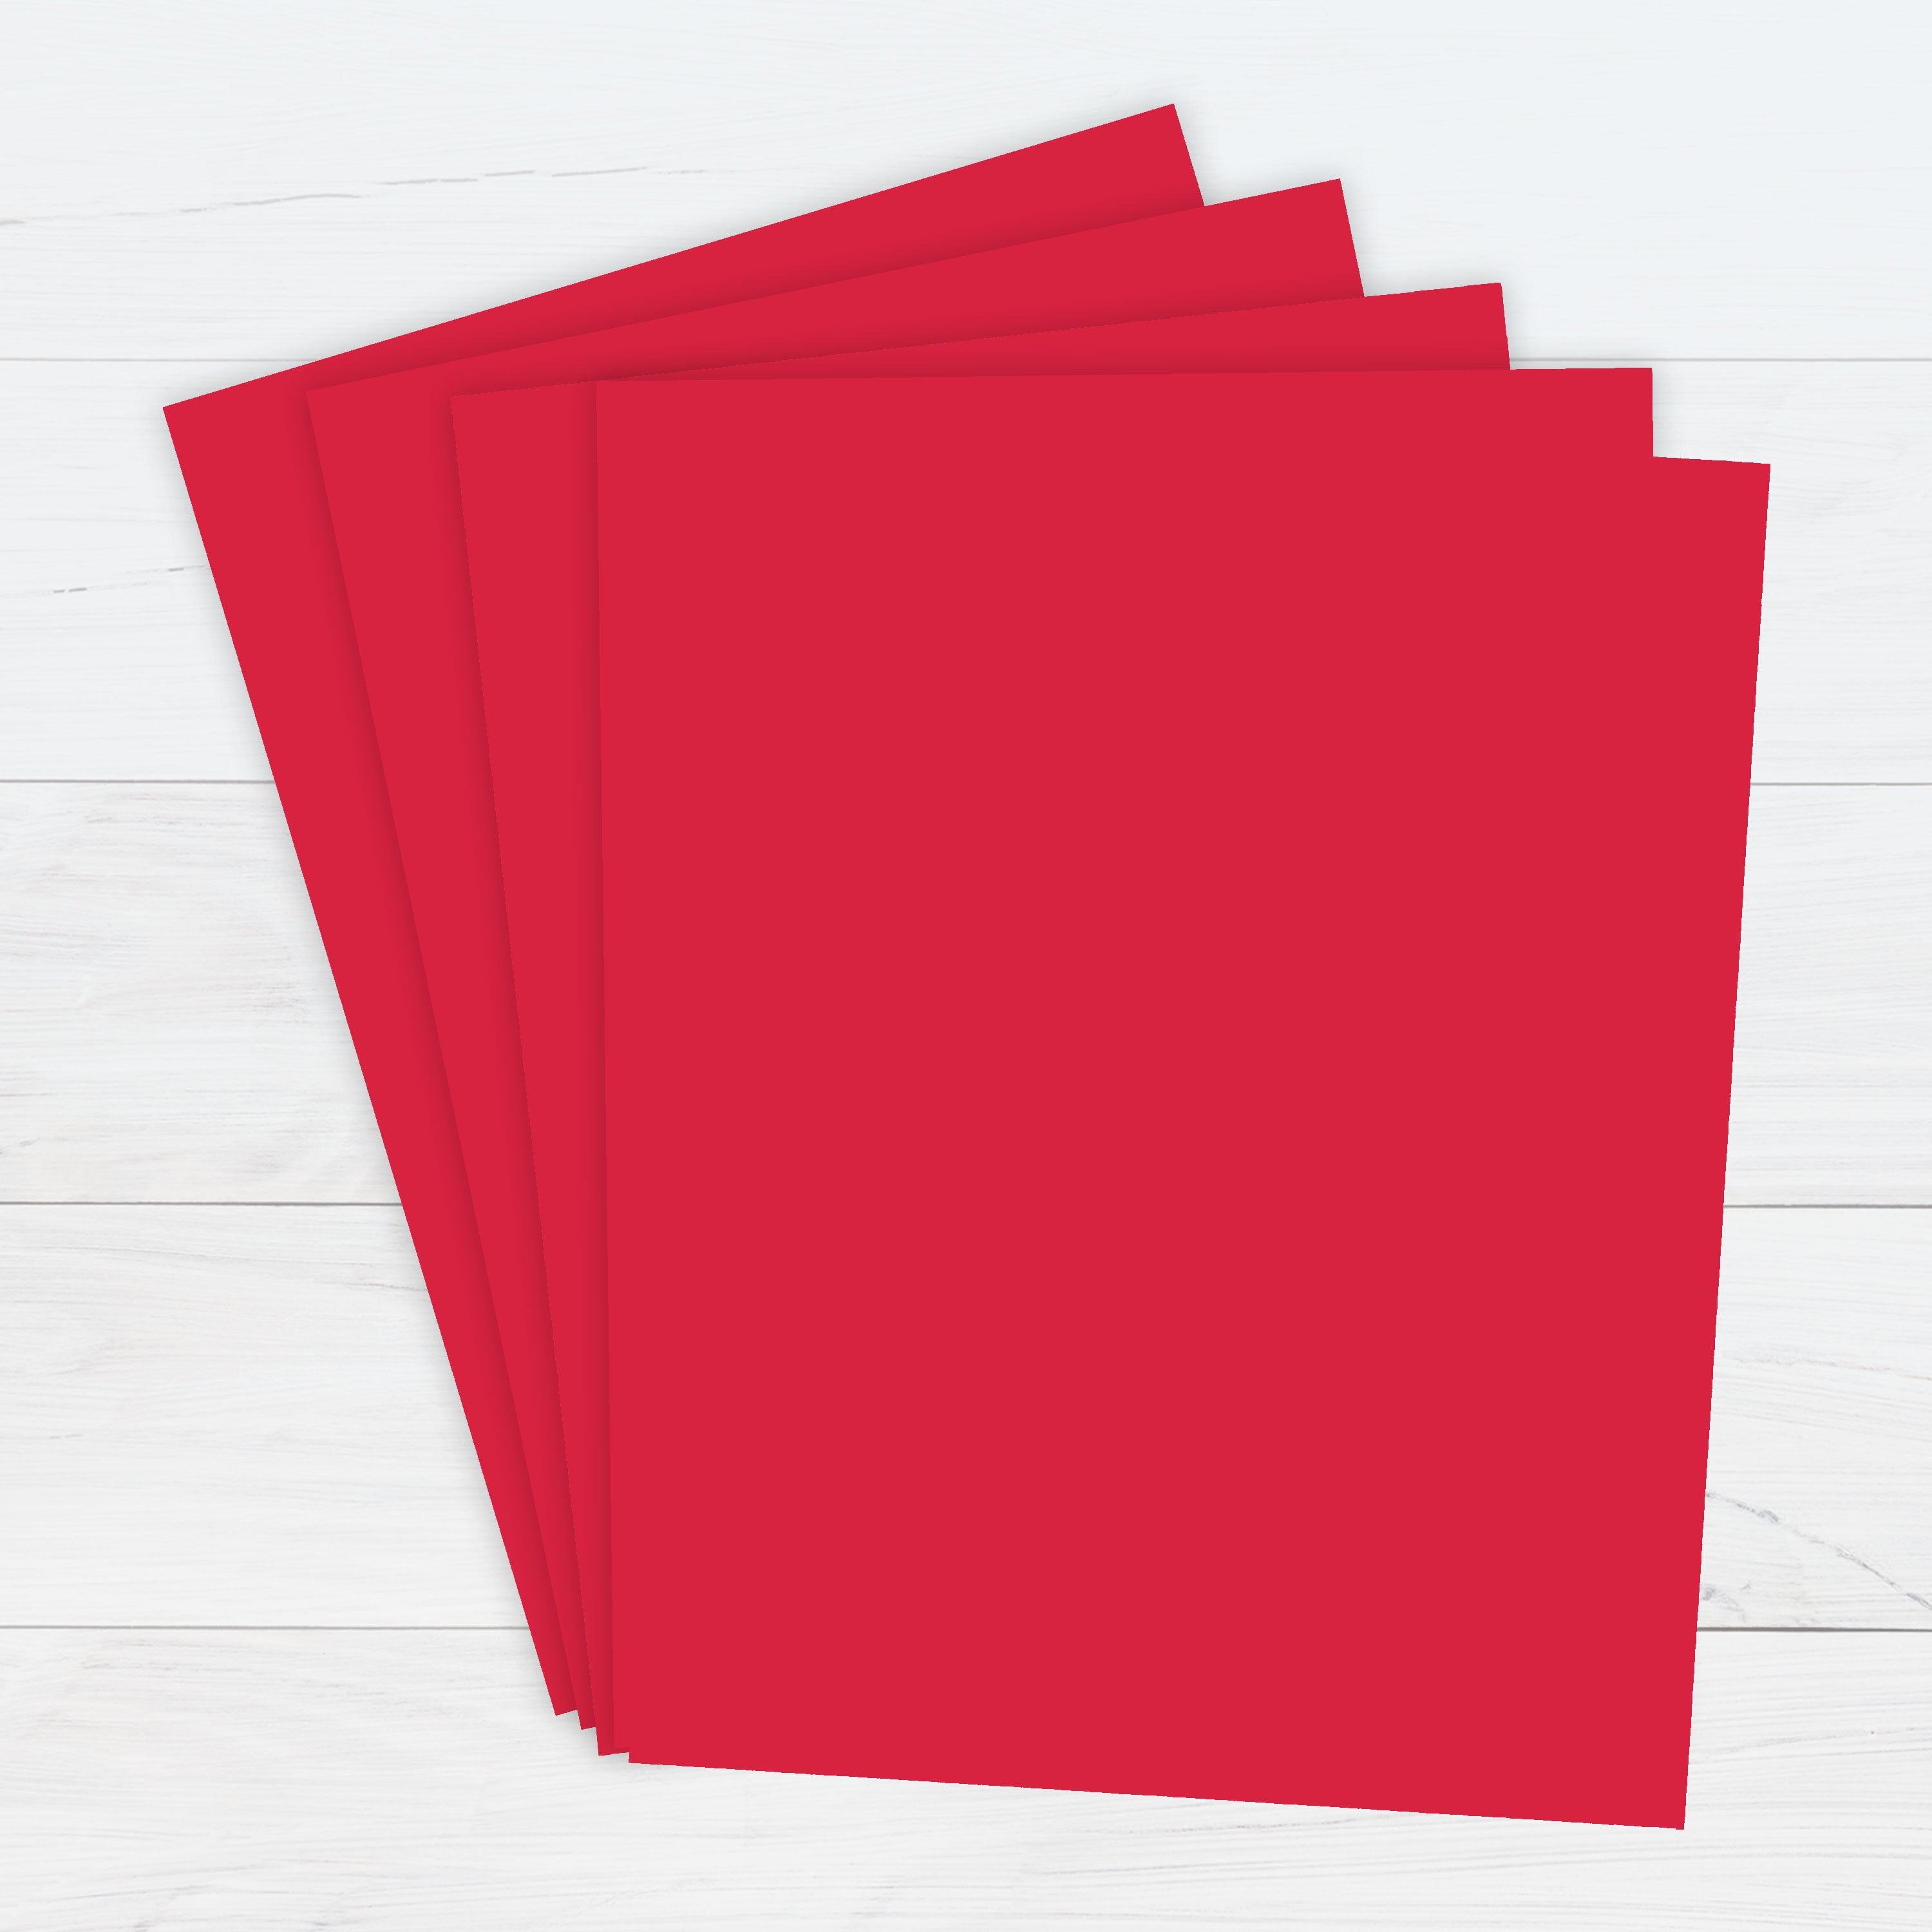 Printworks Bright Color Paper, Red, 8.5 x 11, 24 lb, 1000 Sheets